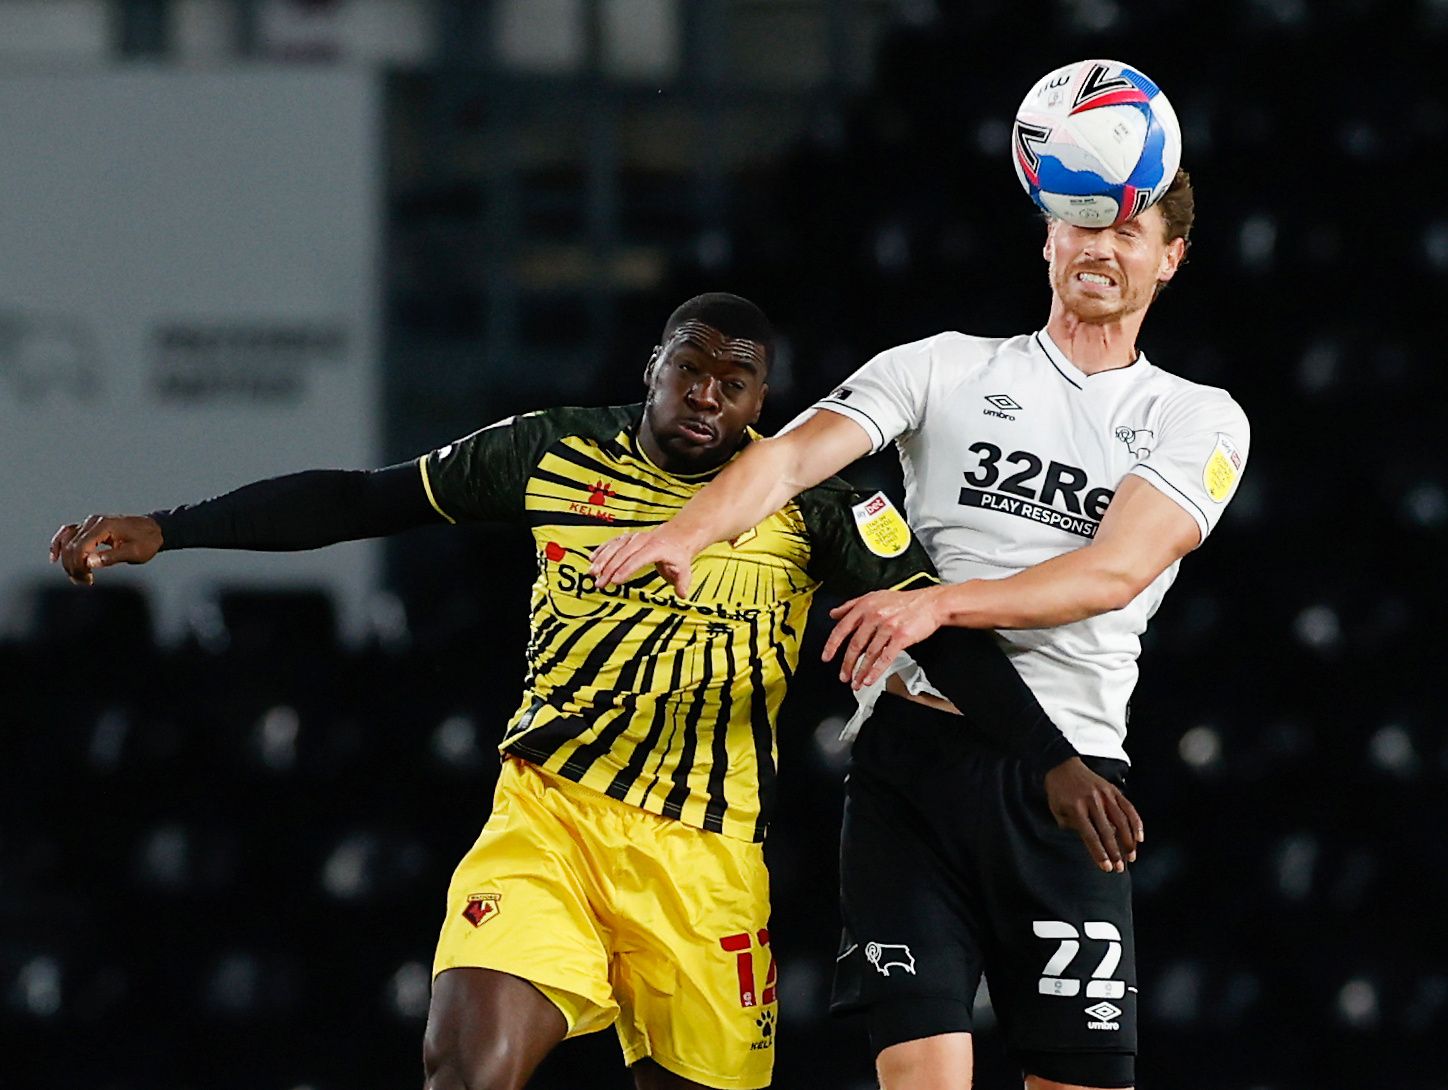 Soccer Football - Championship - Derby County v Watford - Pride Park, Derby, Britain - October 16, 2020  Watford's Ken Sema in action with Derby County's George Evans  Action Images/Jason Cairnduff  EDITORIAL USE ONLY. No use with unauthorized audio, video, data, fixture lists, club/league logos or 